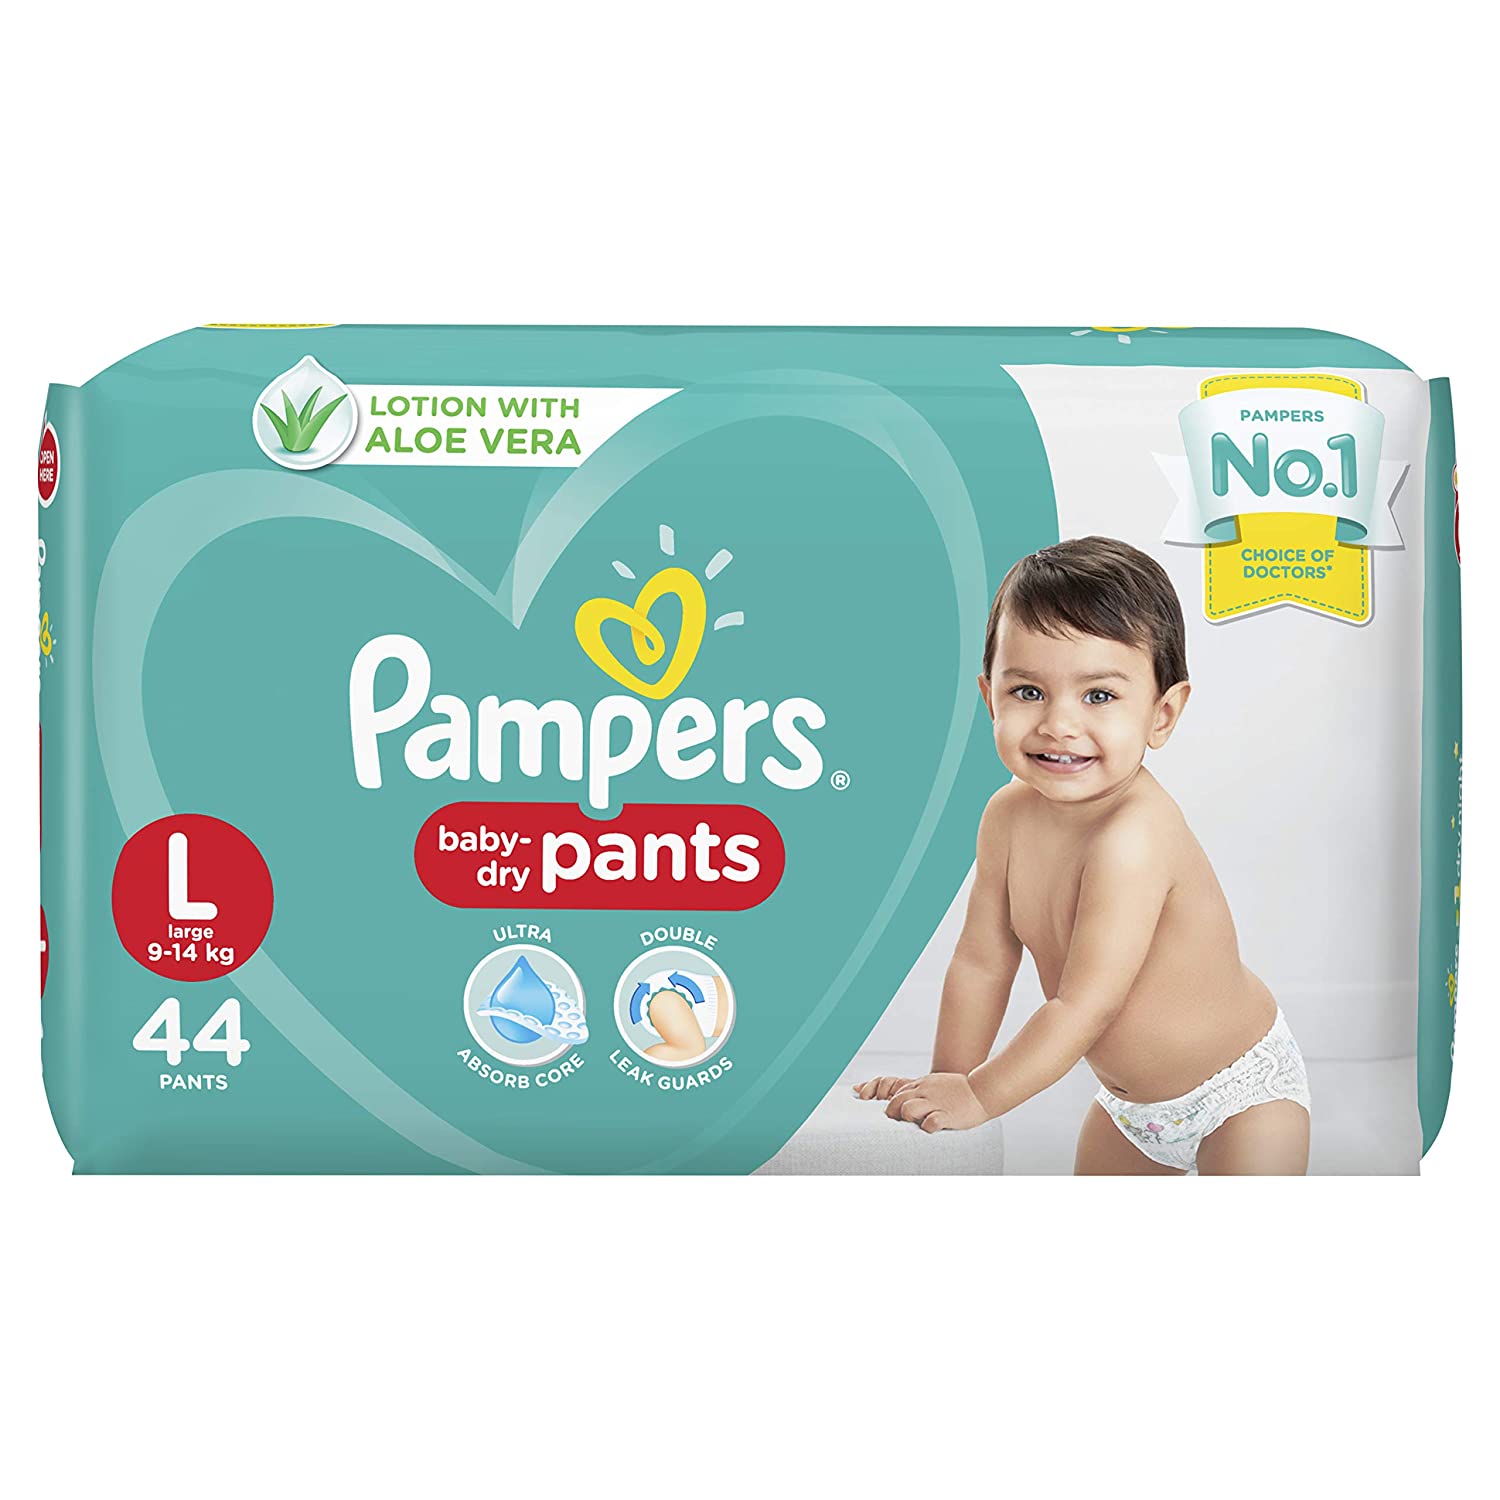 Buy Pampers Baby Dry Pants Diapers Monthly Mega Box, Large, 128  Count&Pampers Diaper Pants, New Baby, 86 Count Online at Low Prices in  India - Amazon.in